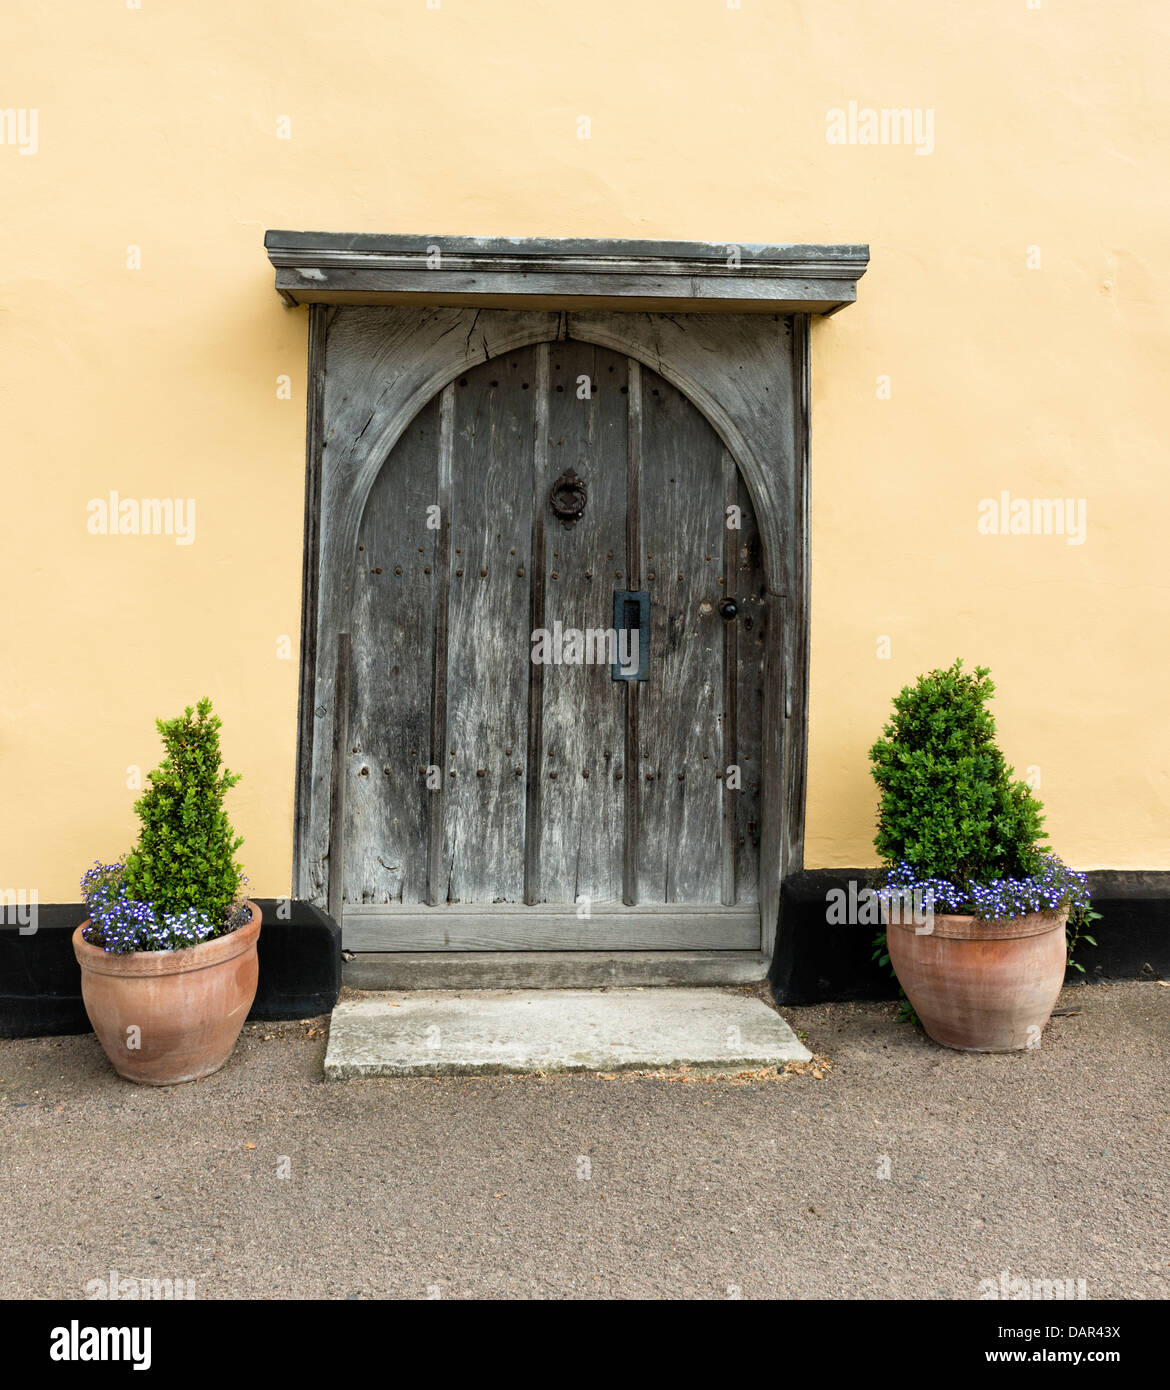 Medieval arched doorway in Lavenham Stock Photo